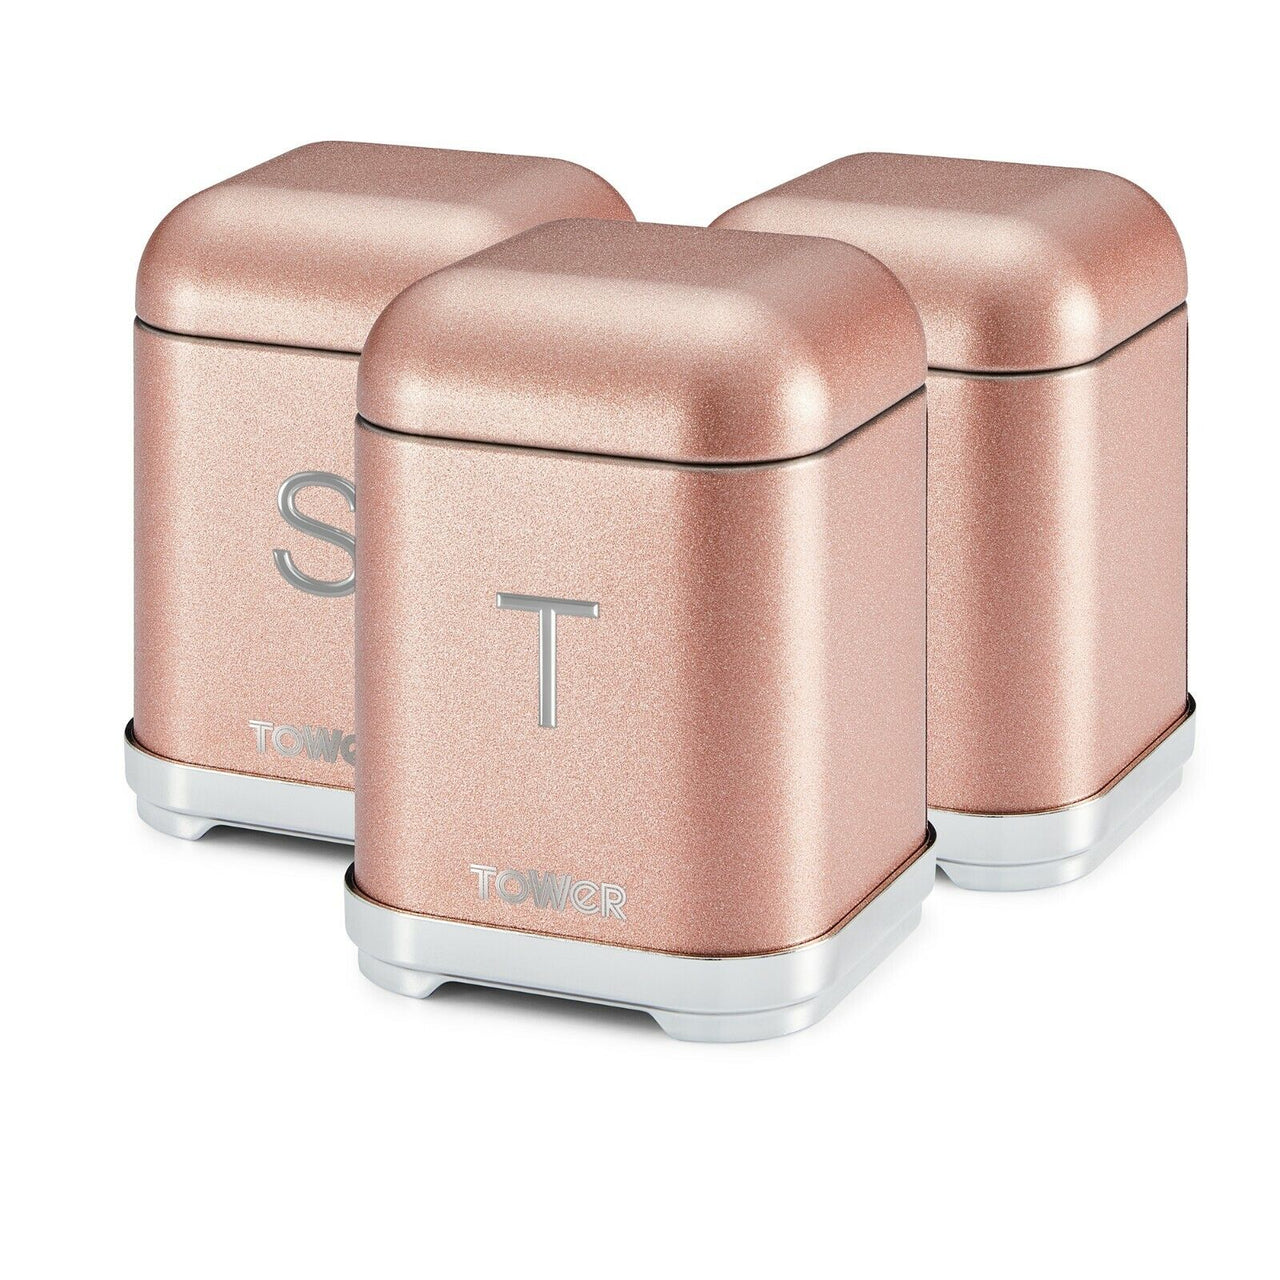 Tower Glitz Pink Set of 3 Kitchen Storage Canisters in Blush Pink